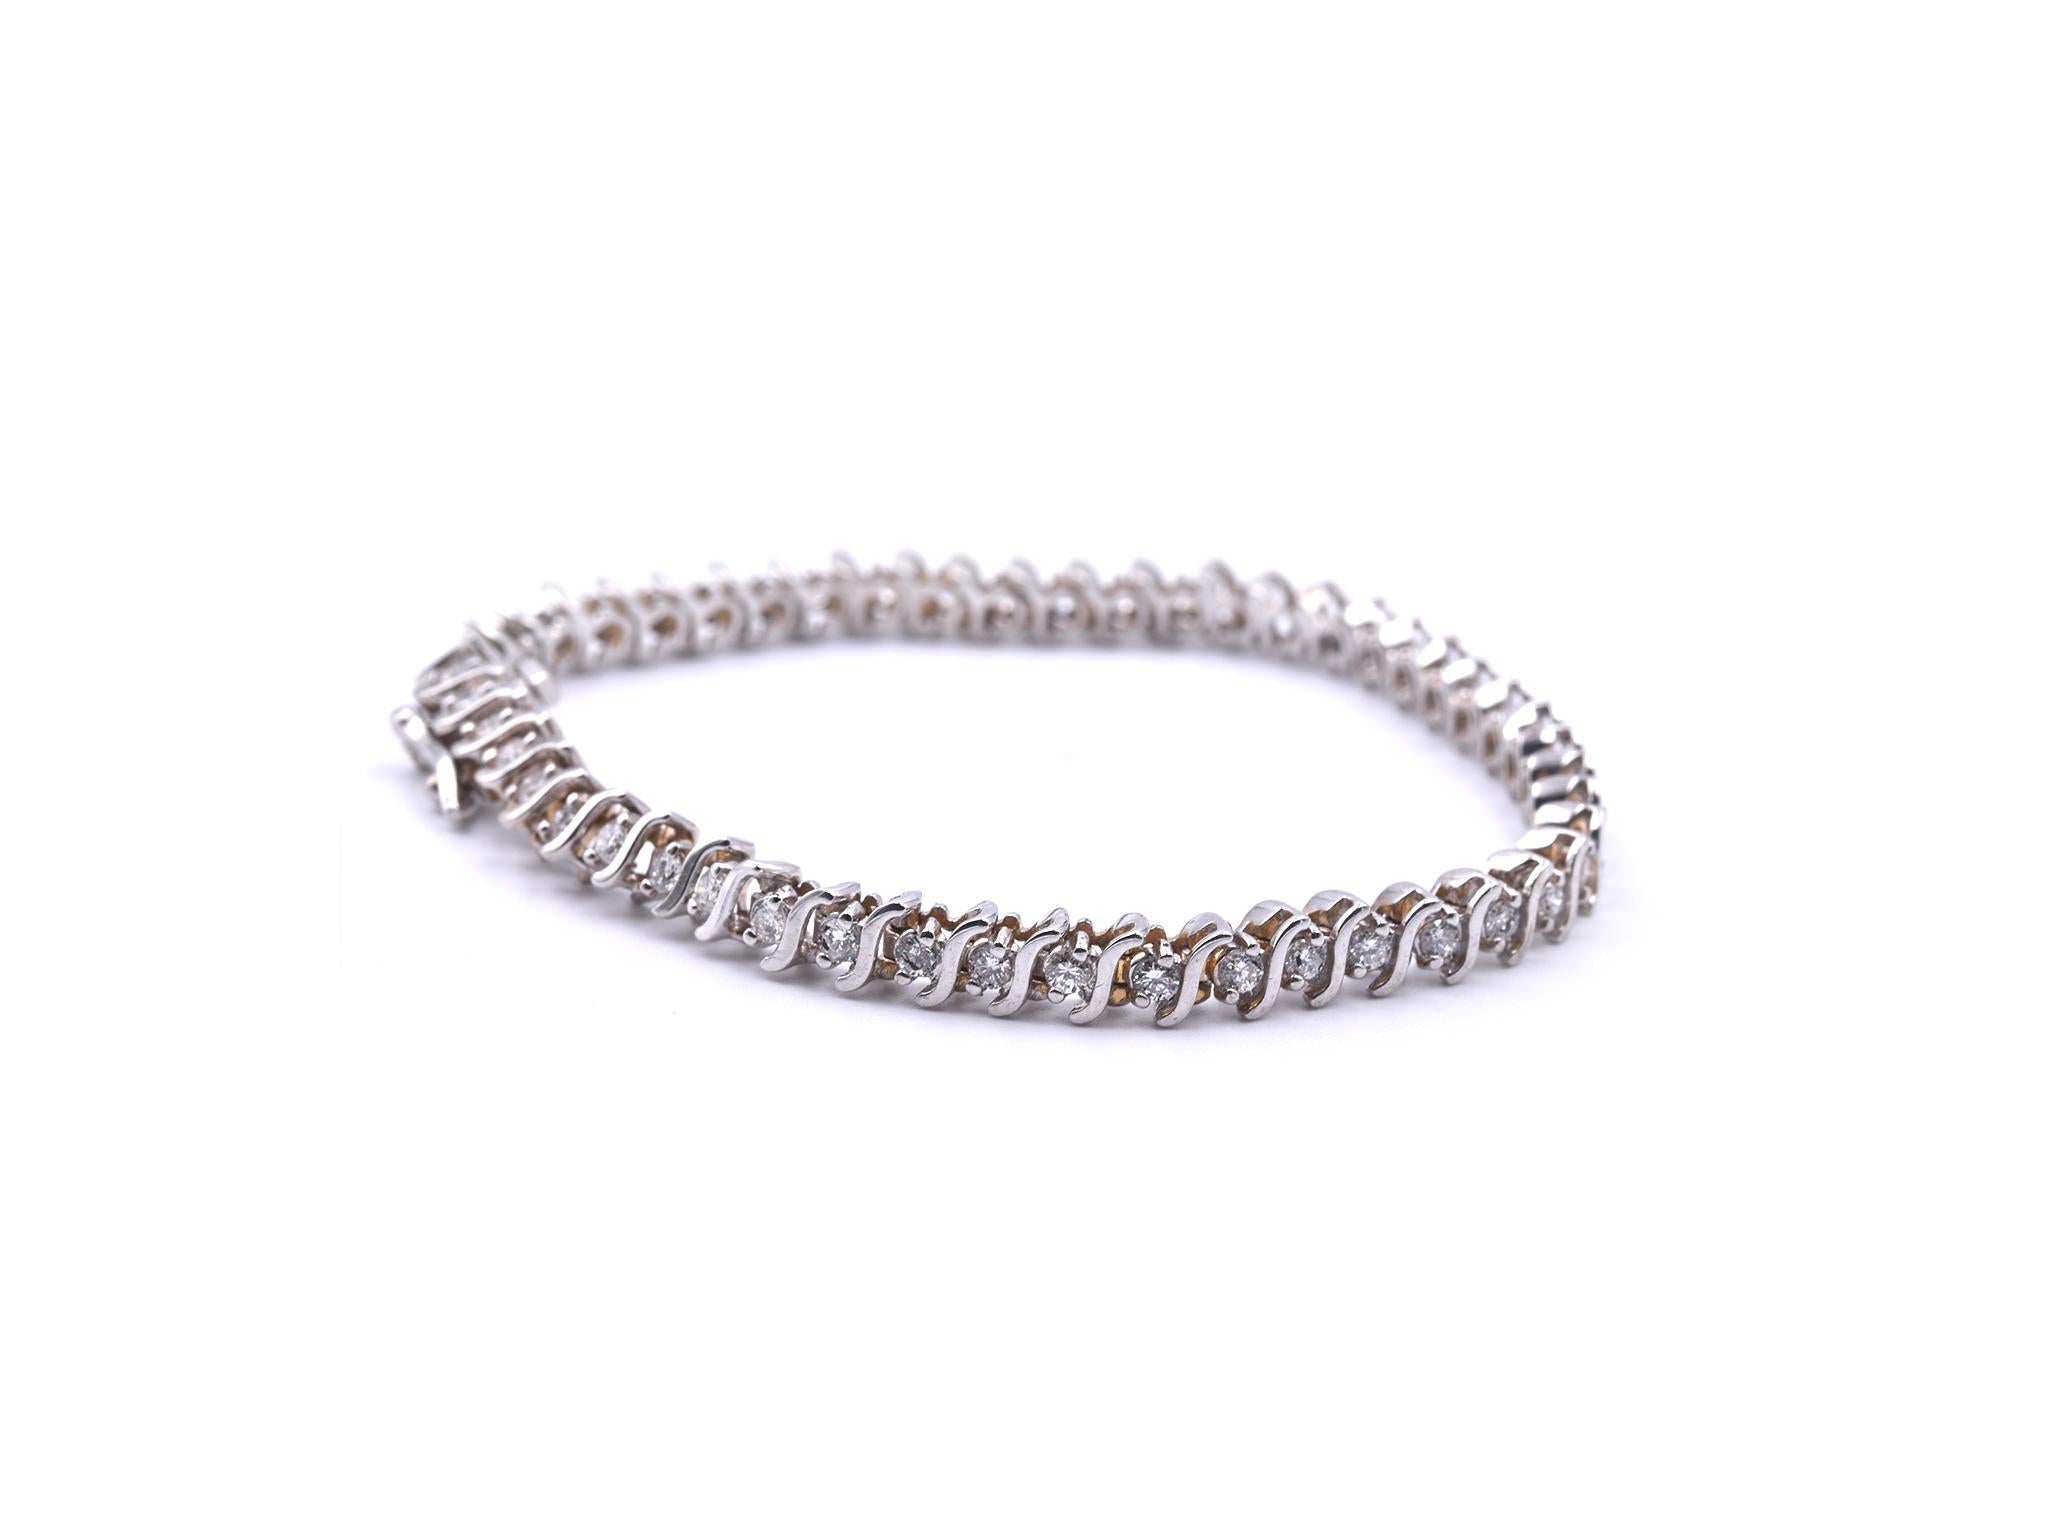 Designer: custom designed
Material: 14k white gold
Diamonds: 48 round brilliant cut = 1.50cttw
Color: J
Clarity: SI2
Dimensions: bracelet measures 7 ¼ inches mm wide and is 4.96mm wide
Weight: 15.00 grams
